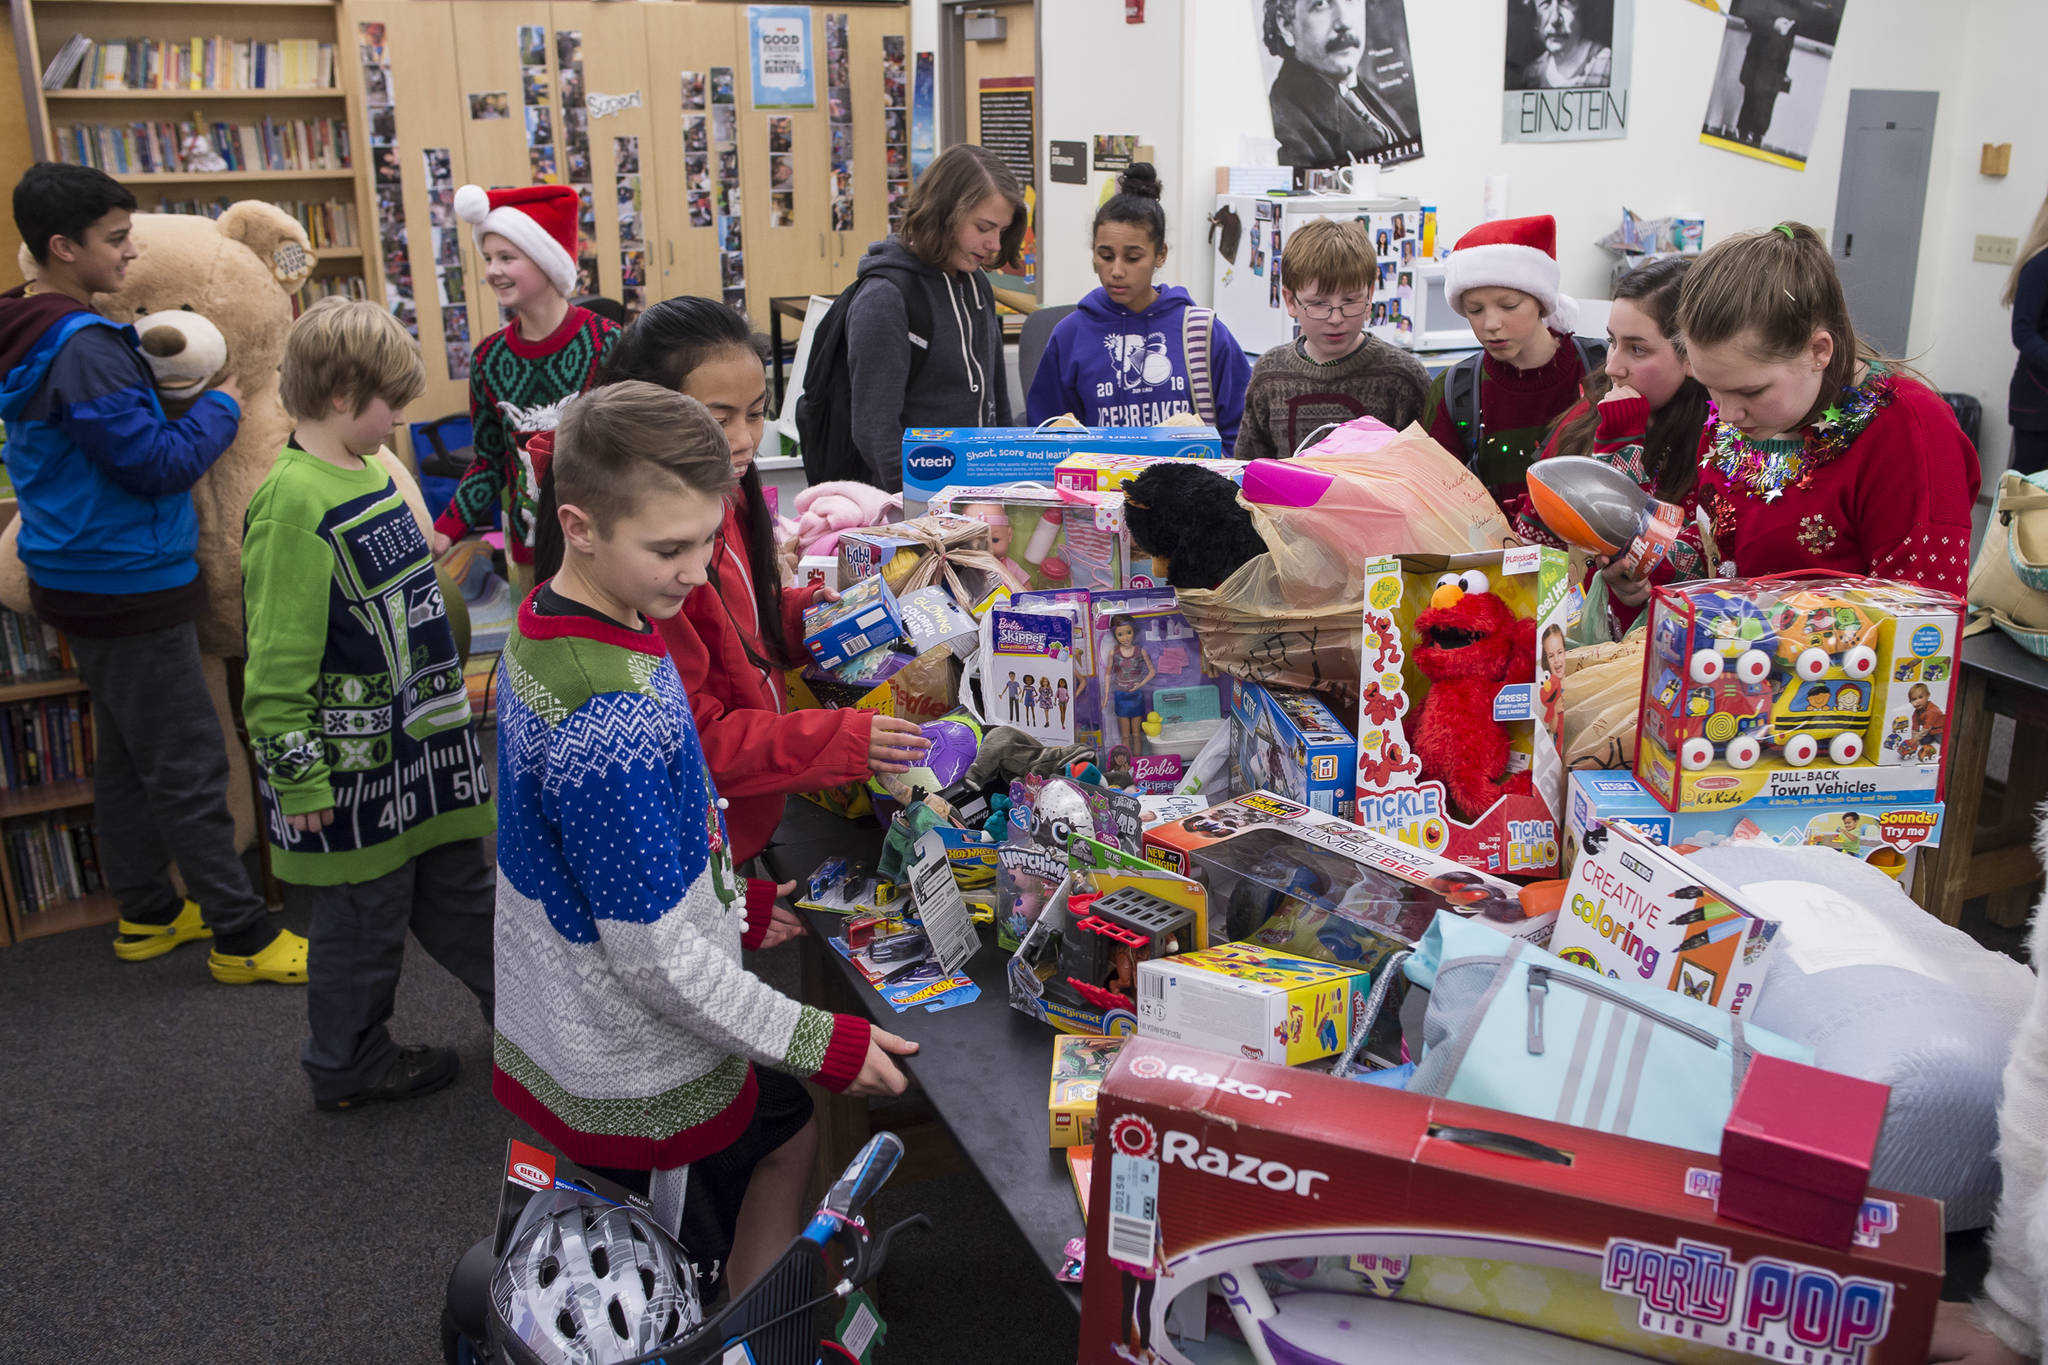 This middle school collected a ‘mind-blowing’ number of toys for a good cause